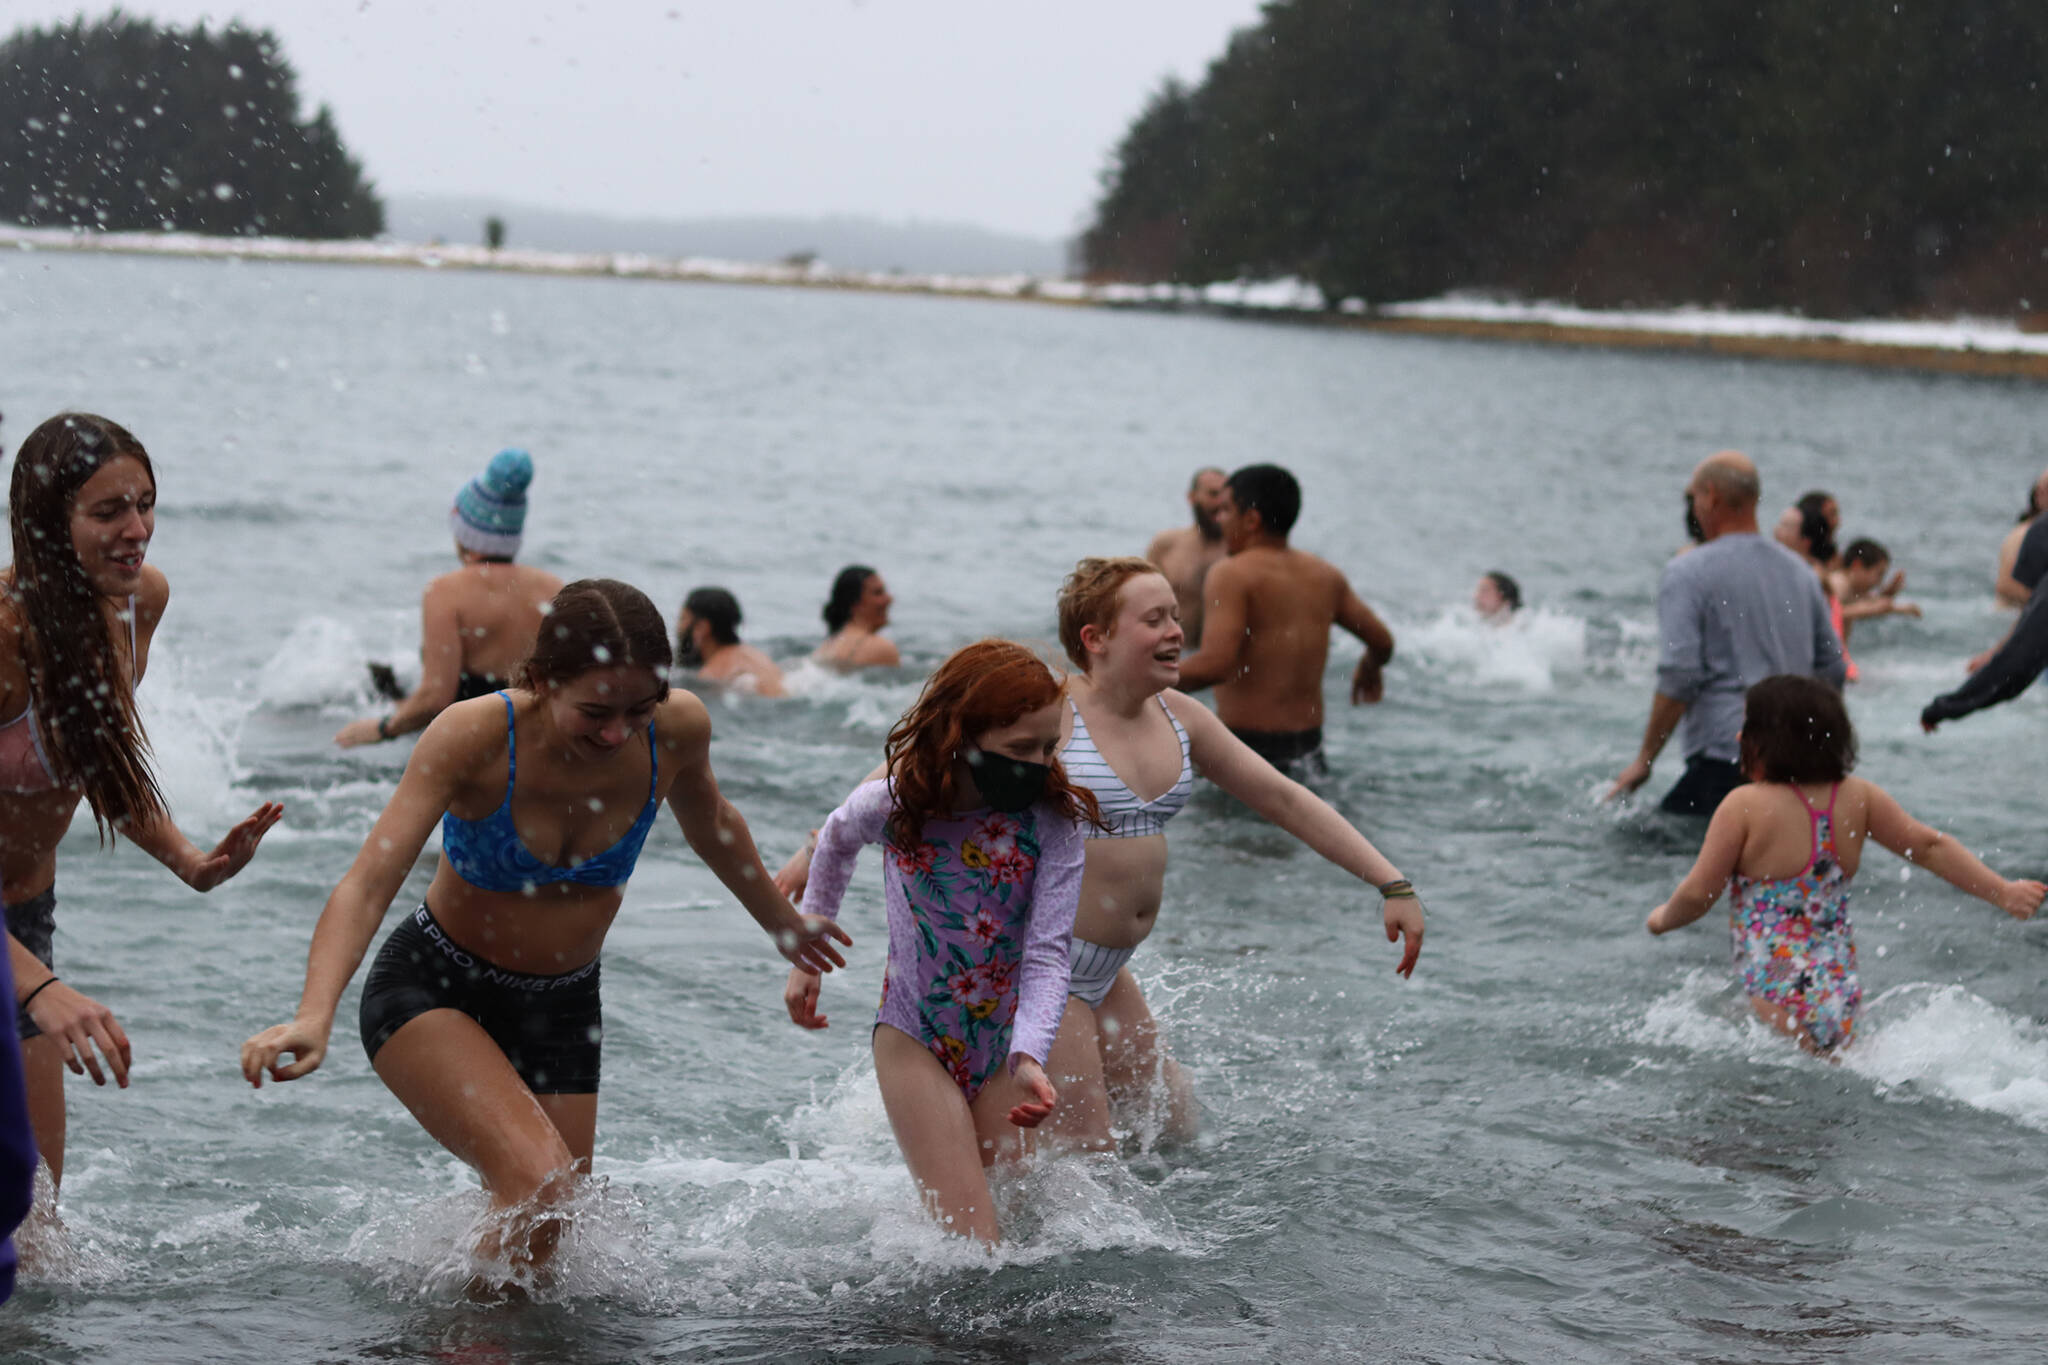 Participants rush back to shore following the 2022 Polar Dip on Saturday. After a pandemic-induced break last year, the long-running event returned to Auke Recreation Area. (Ben Hohenstatt / Juneau Empire)
Participants rush back to shore following the 2022 Polar Dip on Saturday. After a pandemic-induced break last year, the long-running event returned to Auke Recreation Area. (Ben Hohenstatt / Juneau Empire)